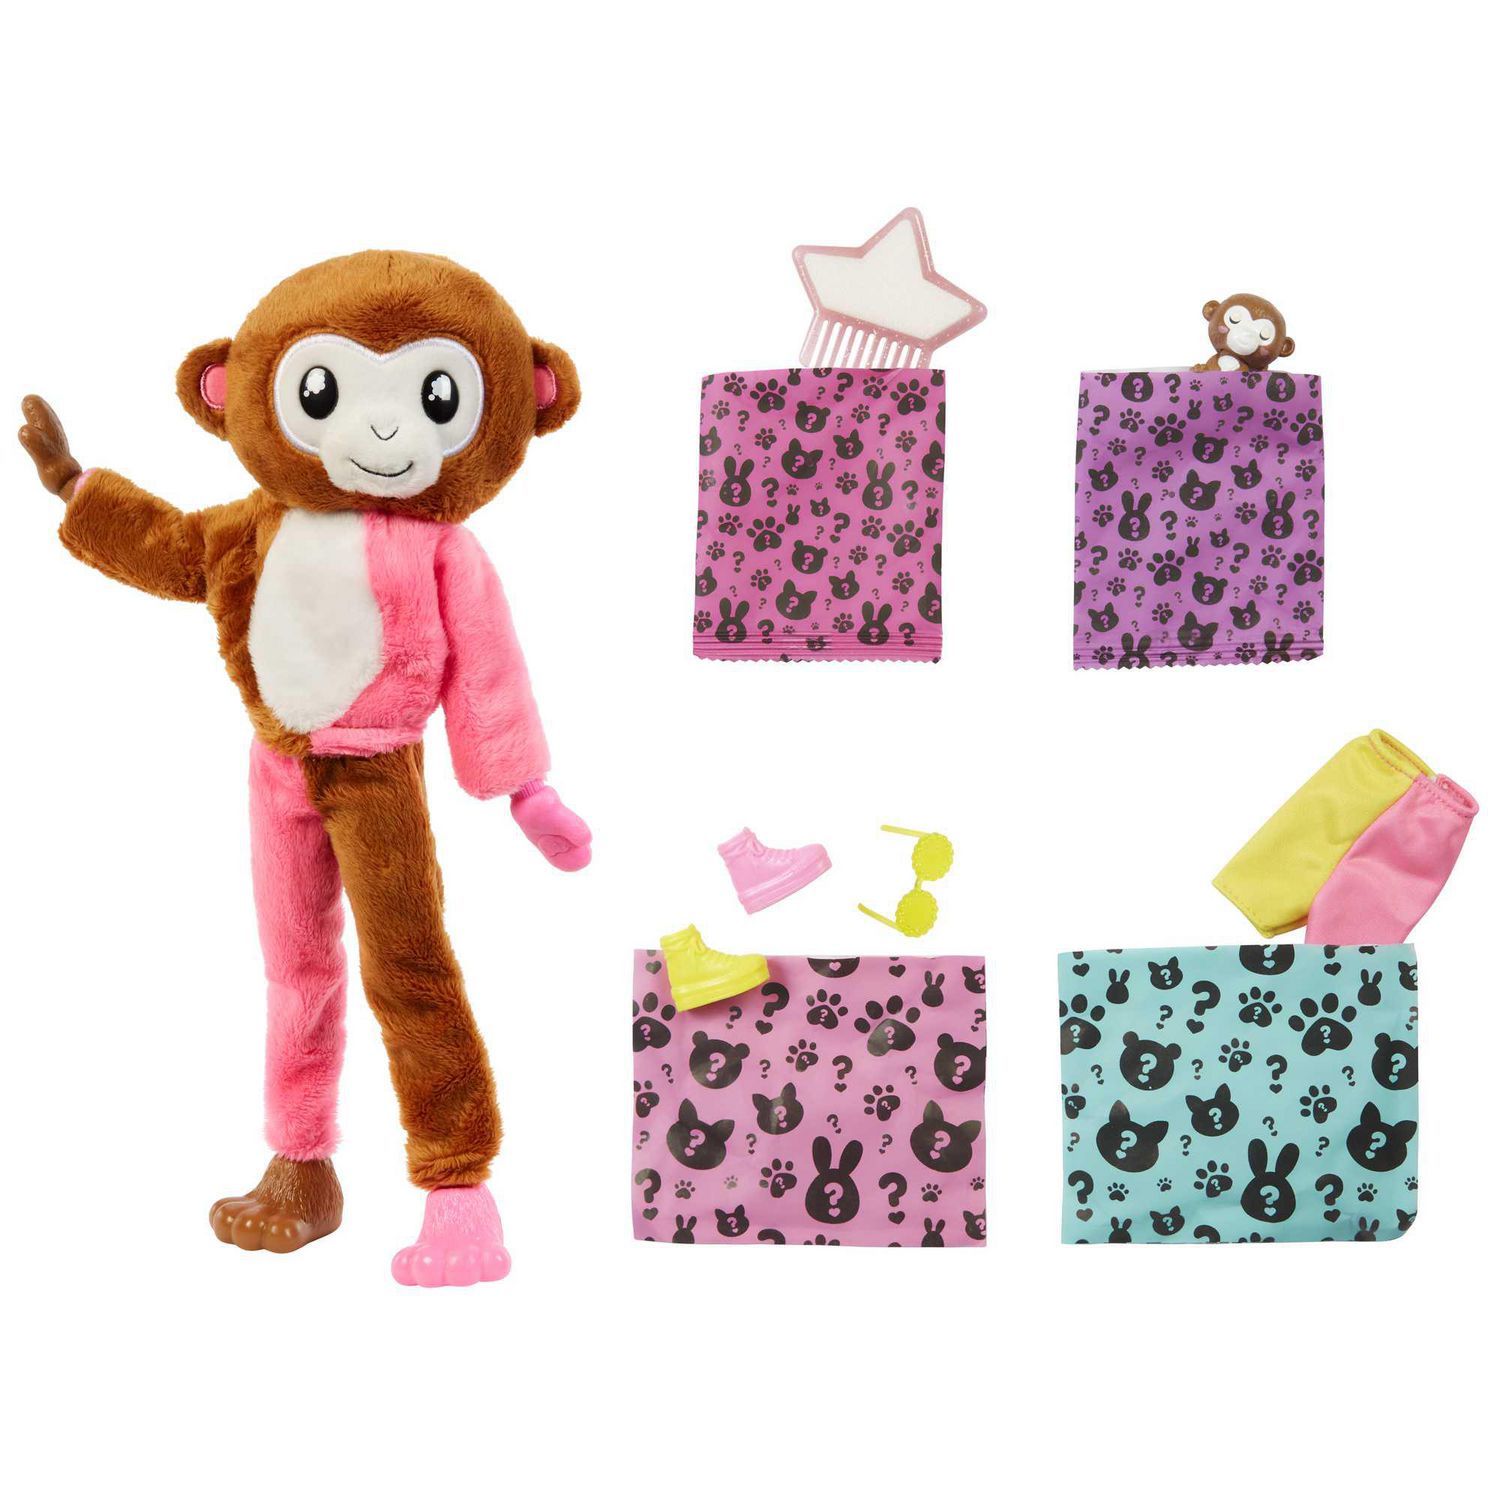 Barbie Dolls and Accessories, Cutie Reveal Doll, Jungle Series Monkey